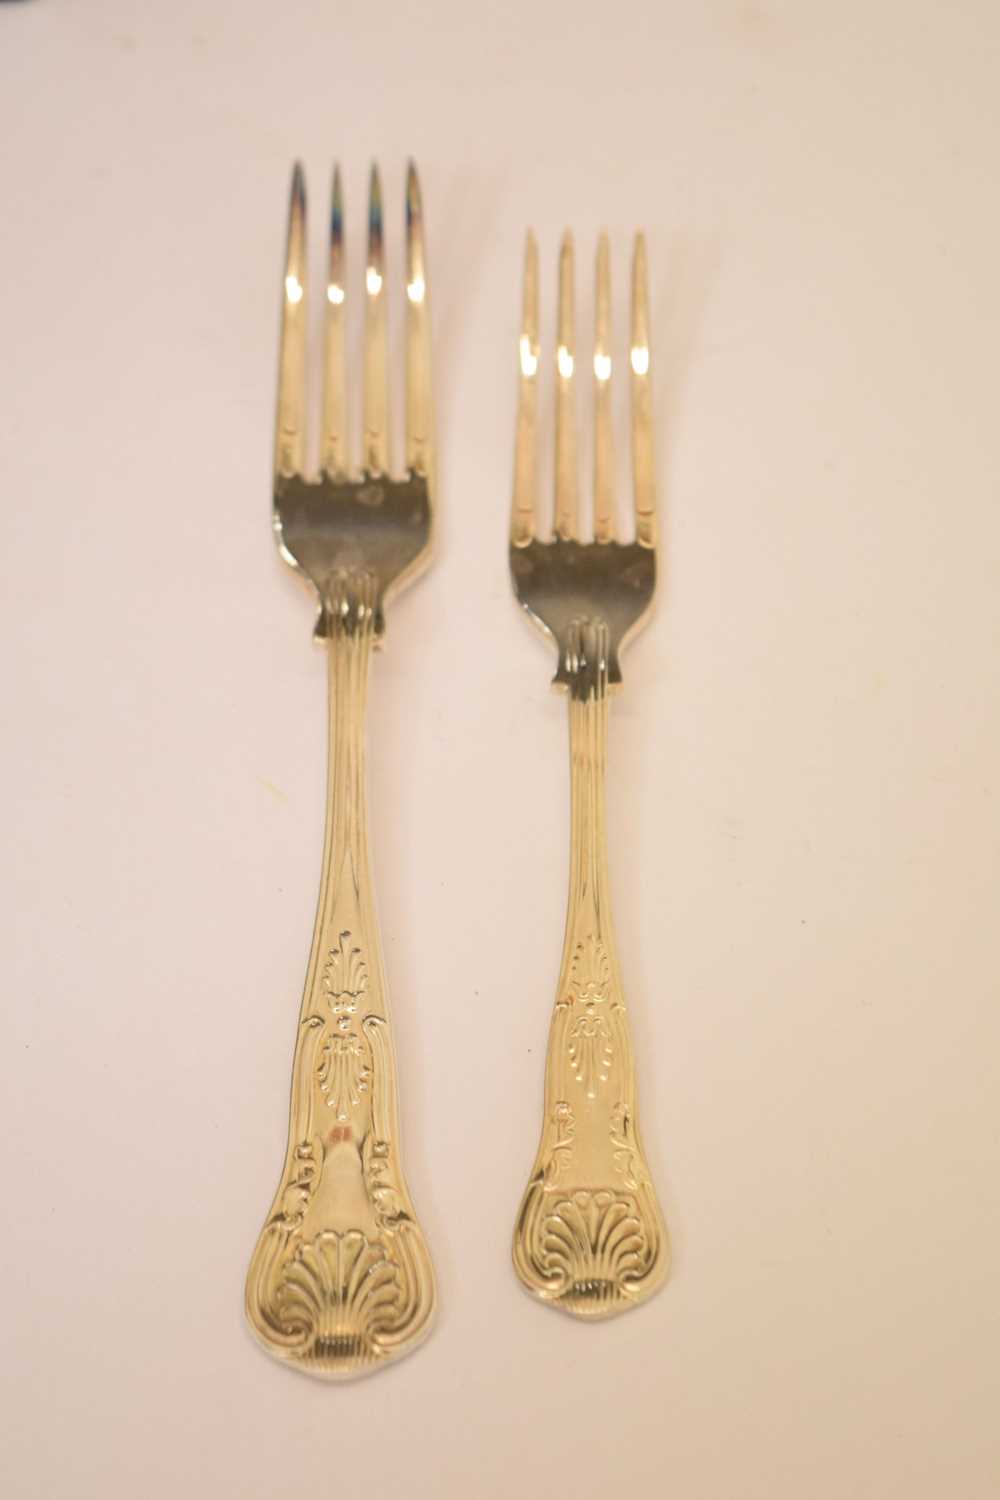 Canteen on King's pattern EPNS Sheffield cutlery - Image 3 of 5